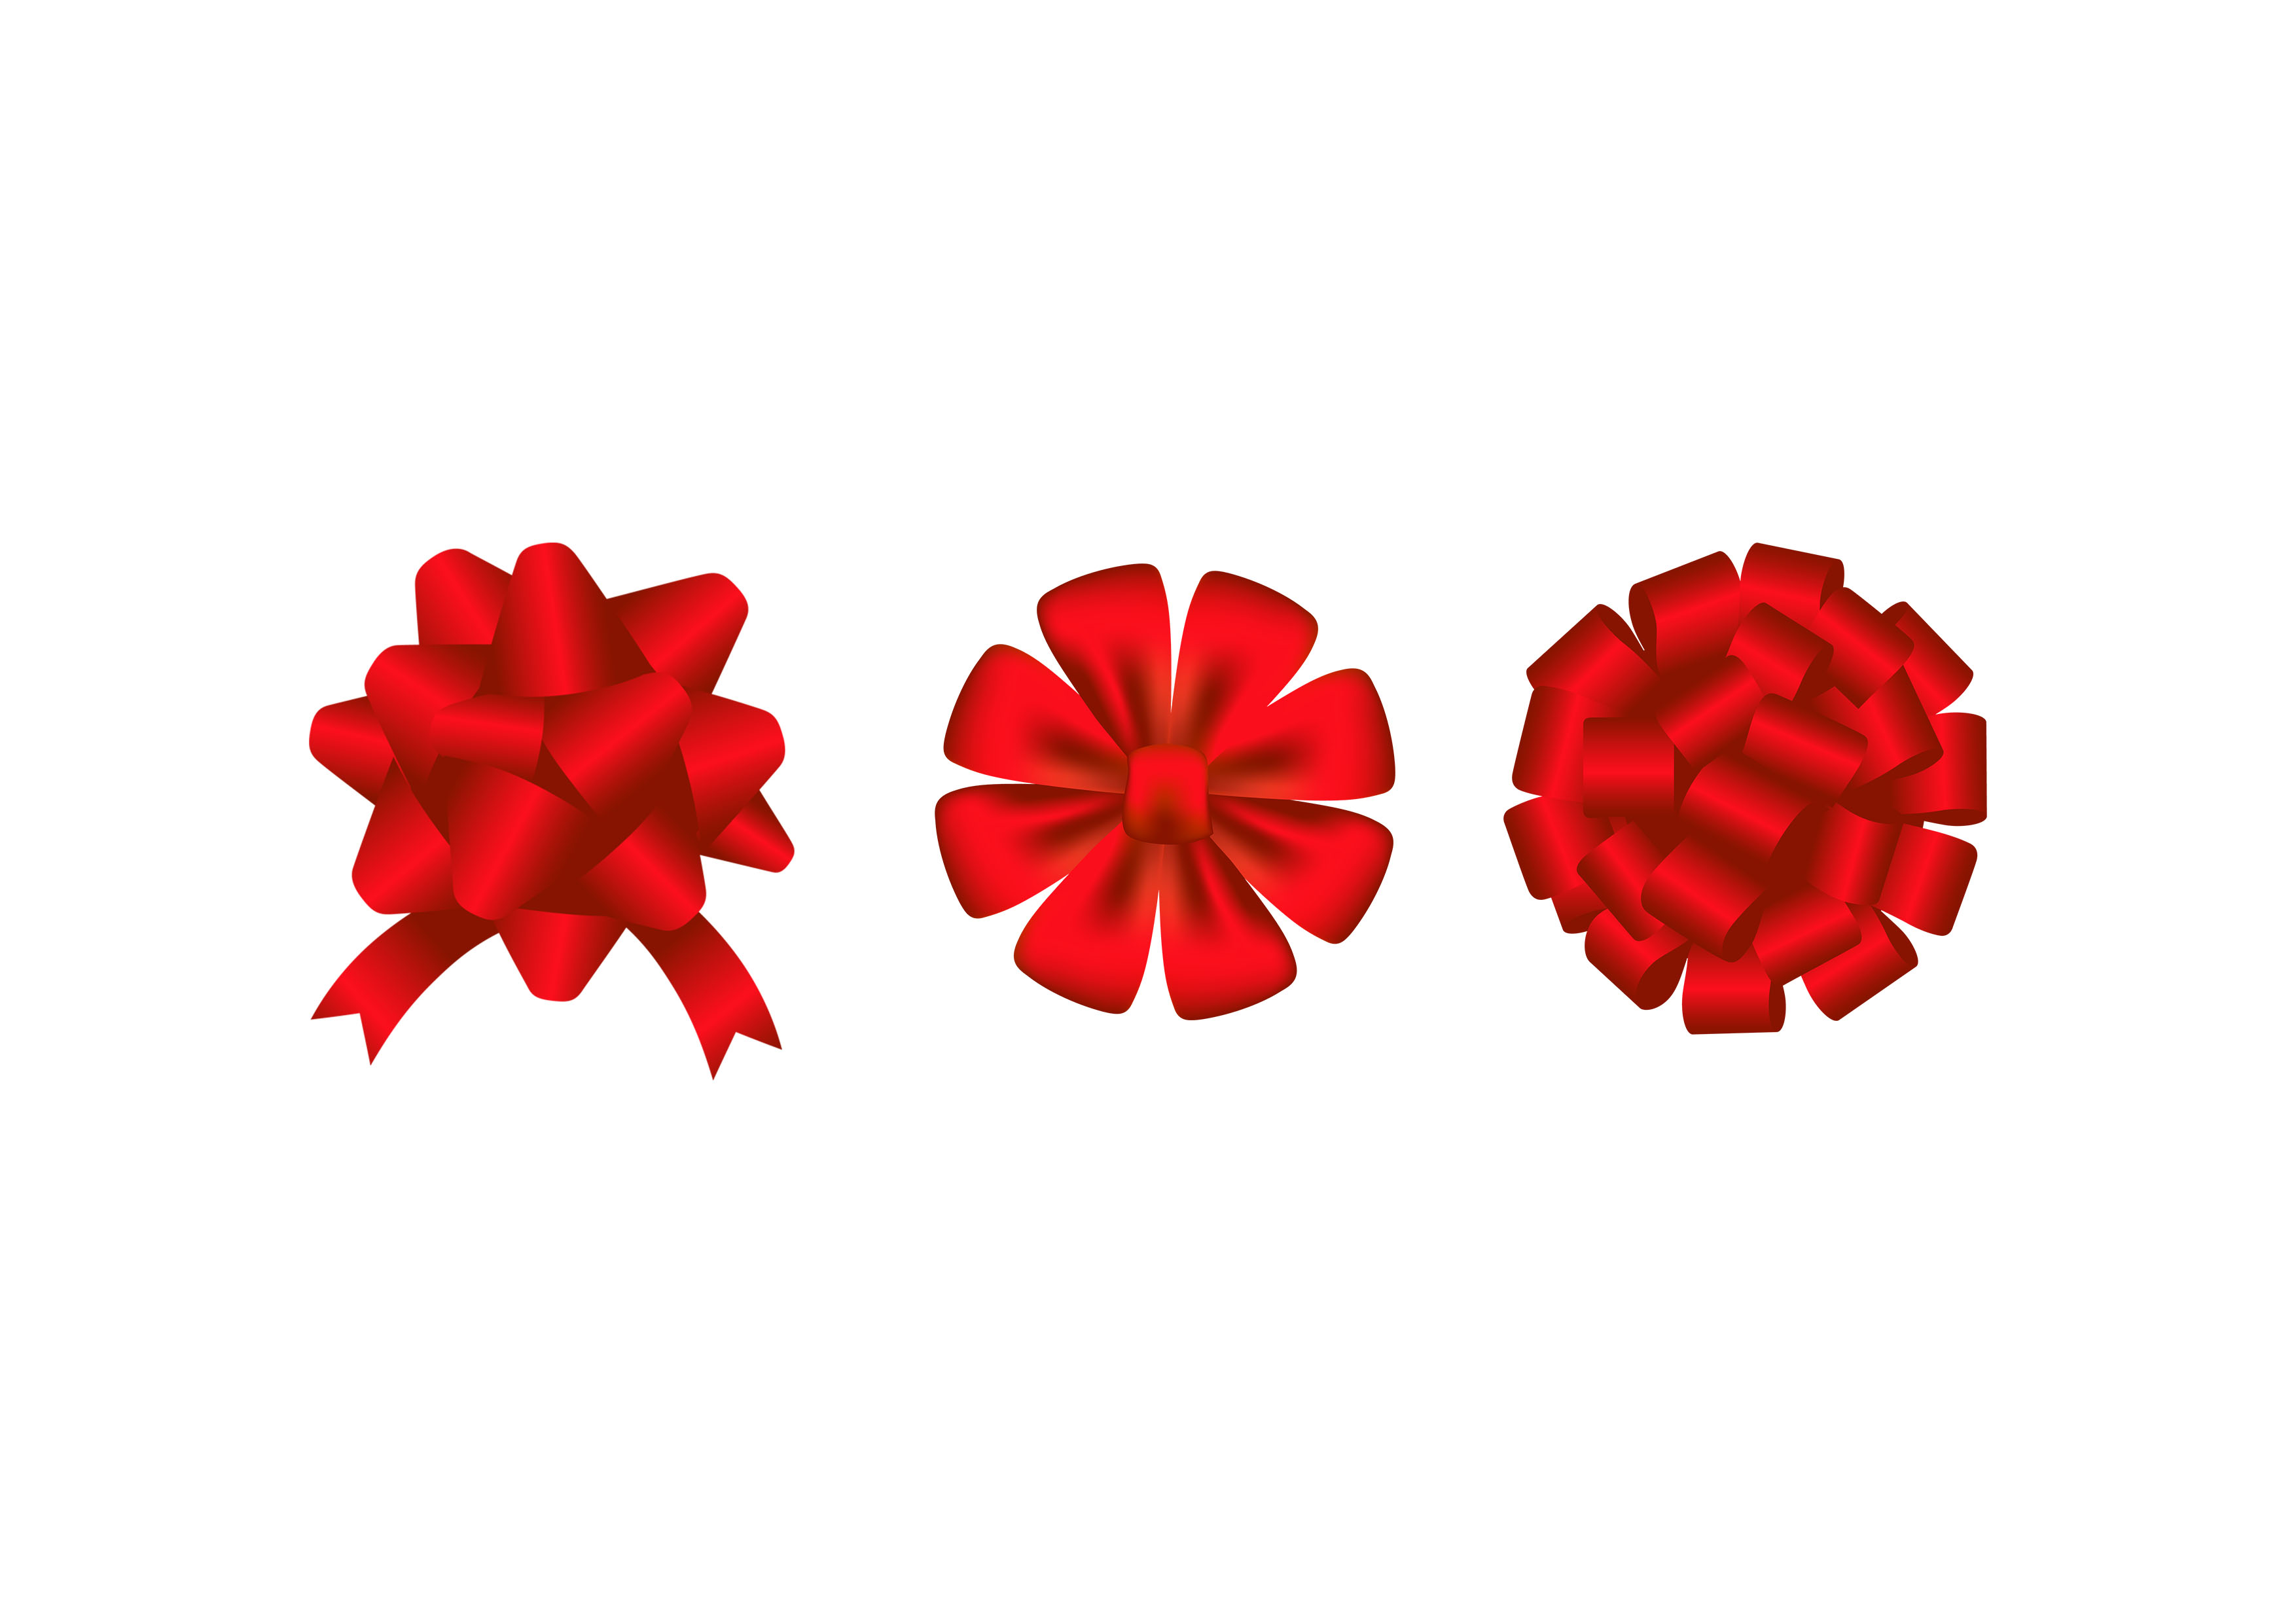 Three red bows on a white background.